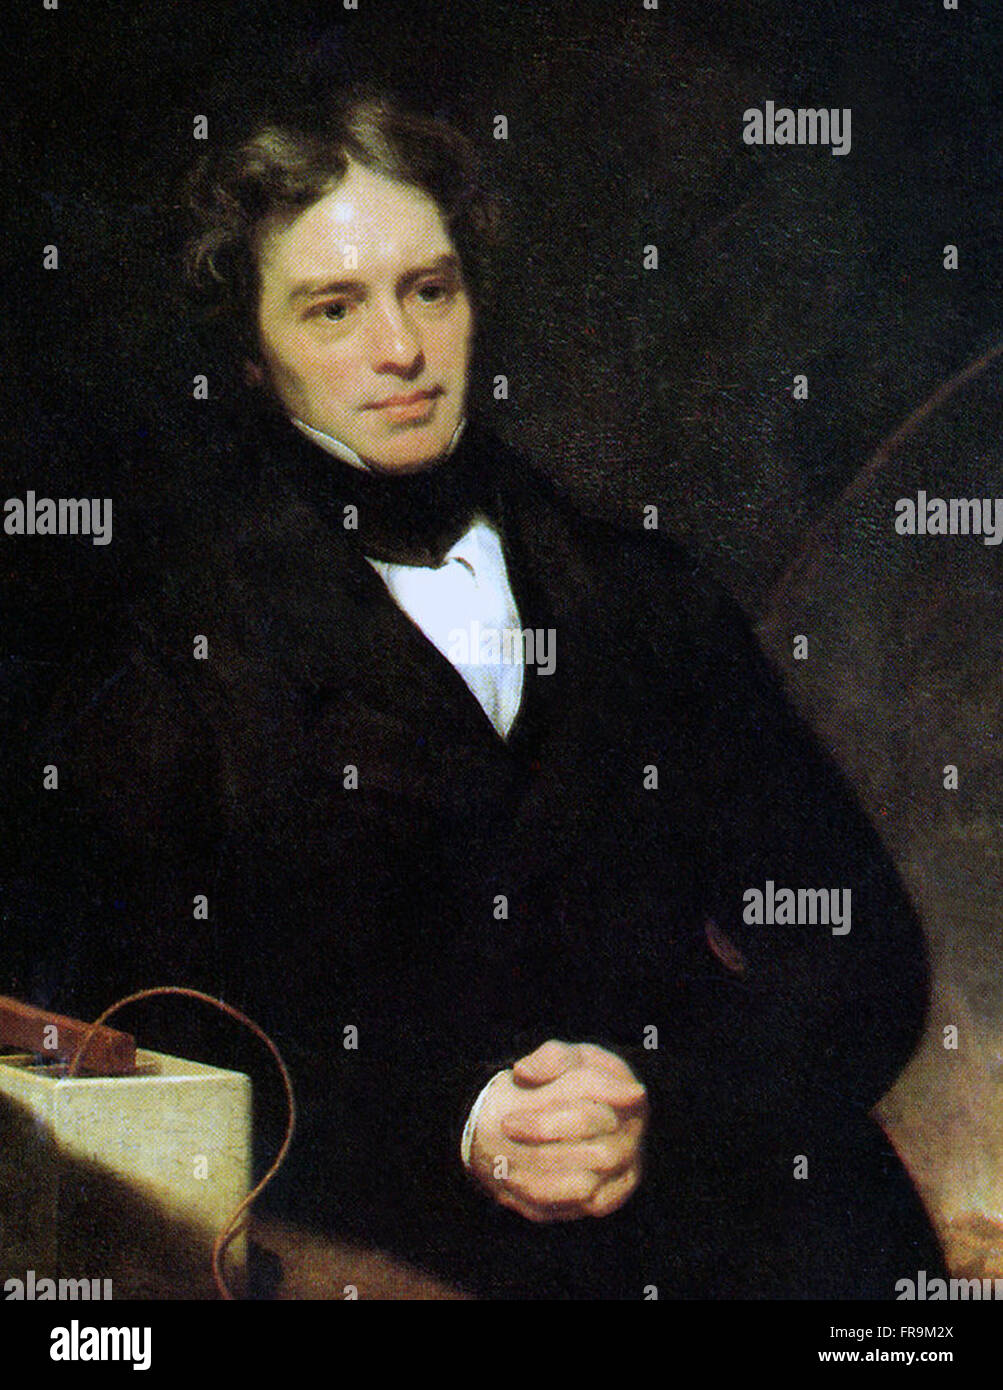 Portrait of Michael Faraday in 1842, oil on canvas by artist Thomas Phillips.  Michael Faraday - 22 September 1791 – 25 August 1867 was an English scientist who contributed to the fields of electromagnetism and electrochemistry. His main discoveries include those of electromagnetic induction, diamagnetism and electrolysis. Stock Photo